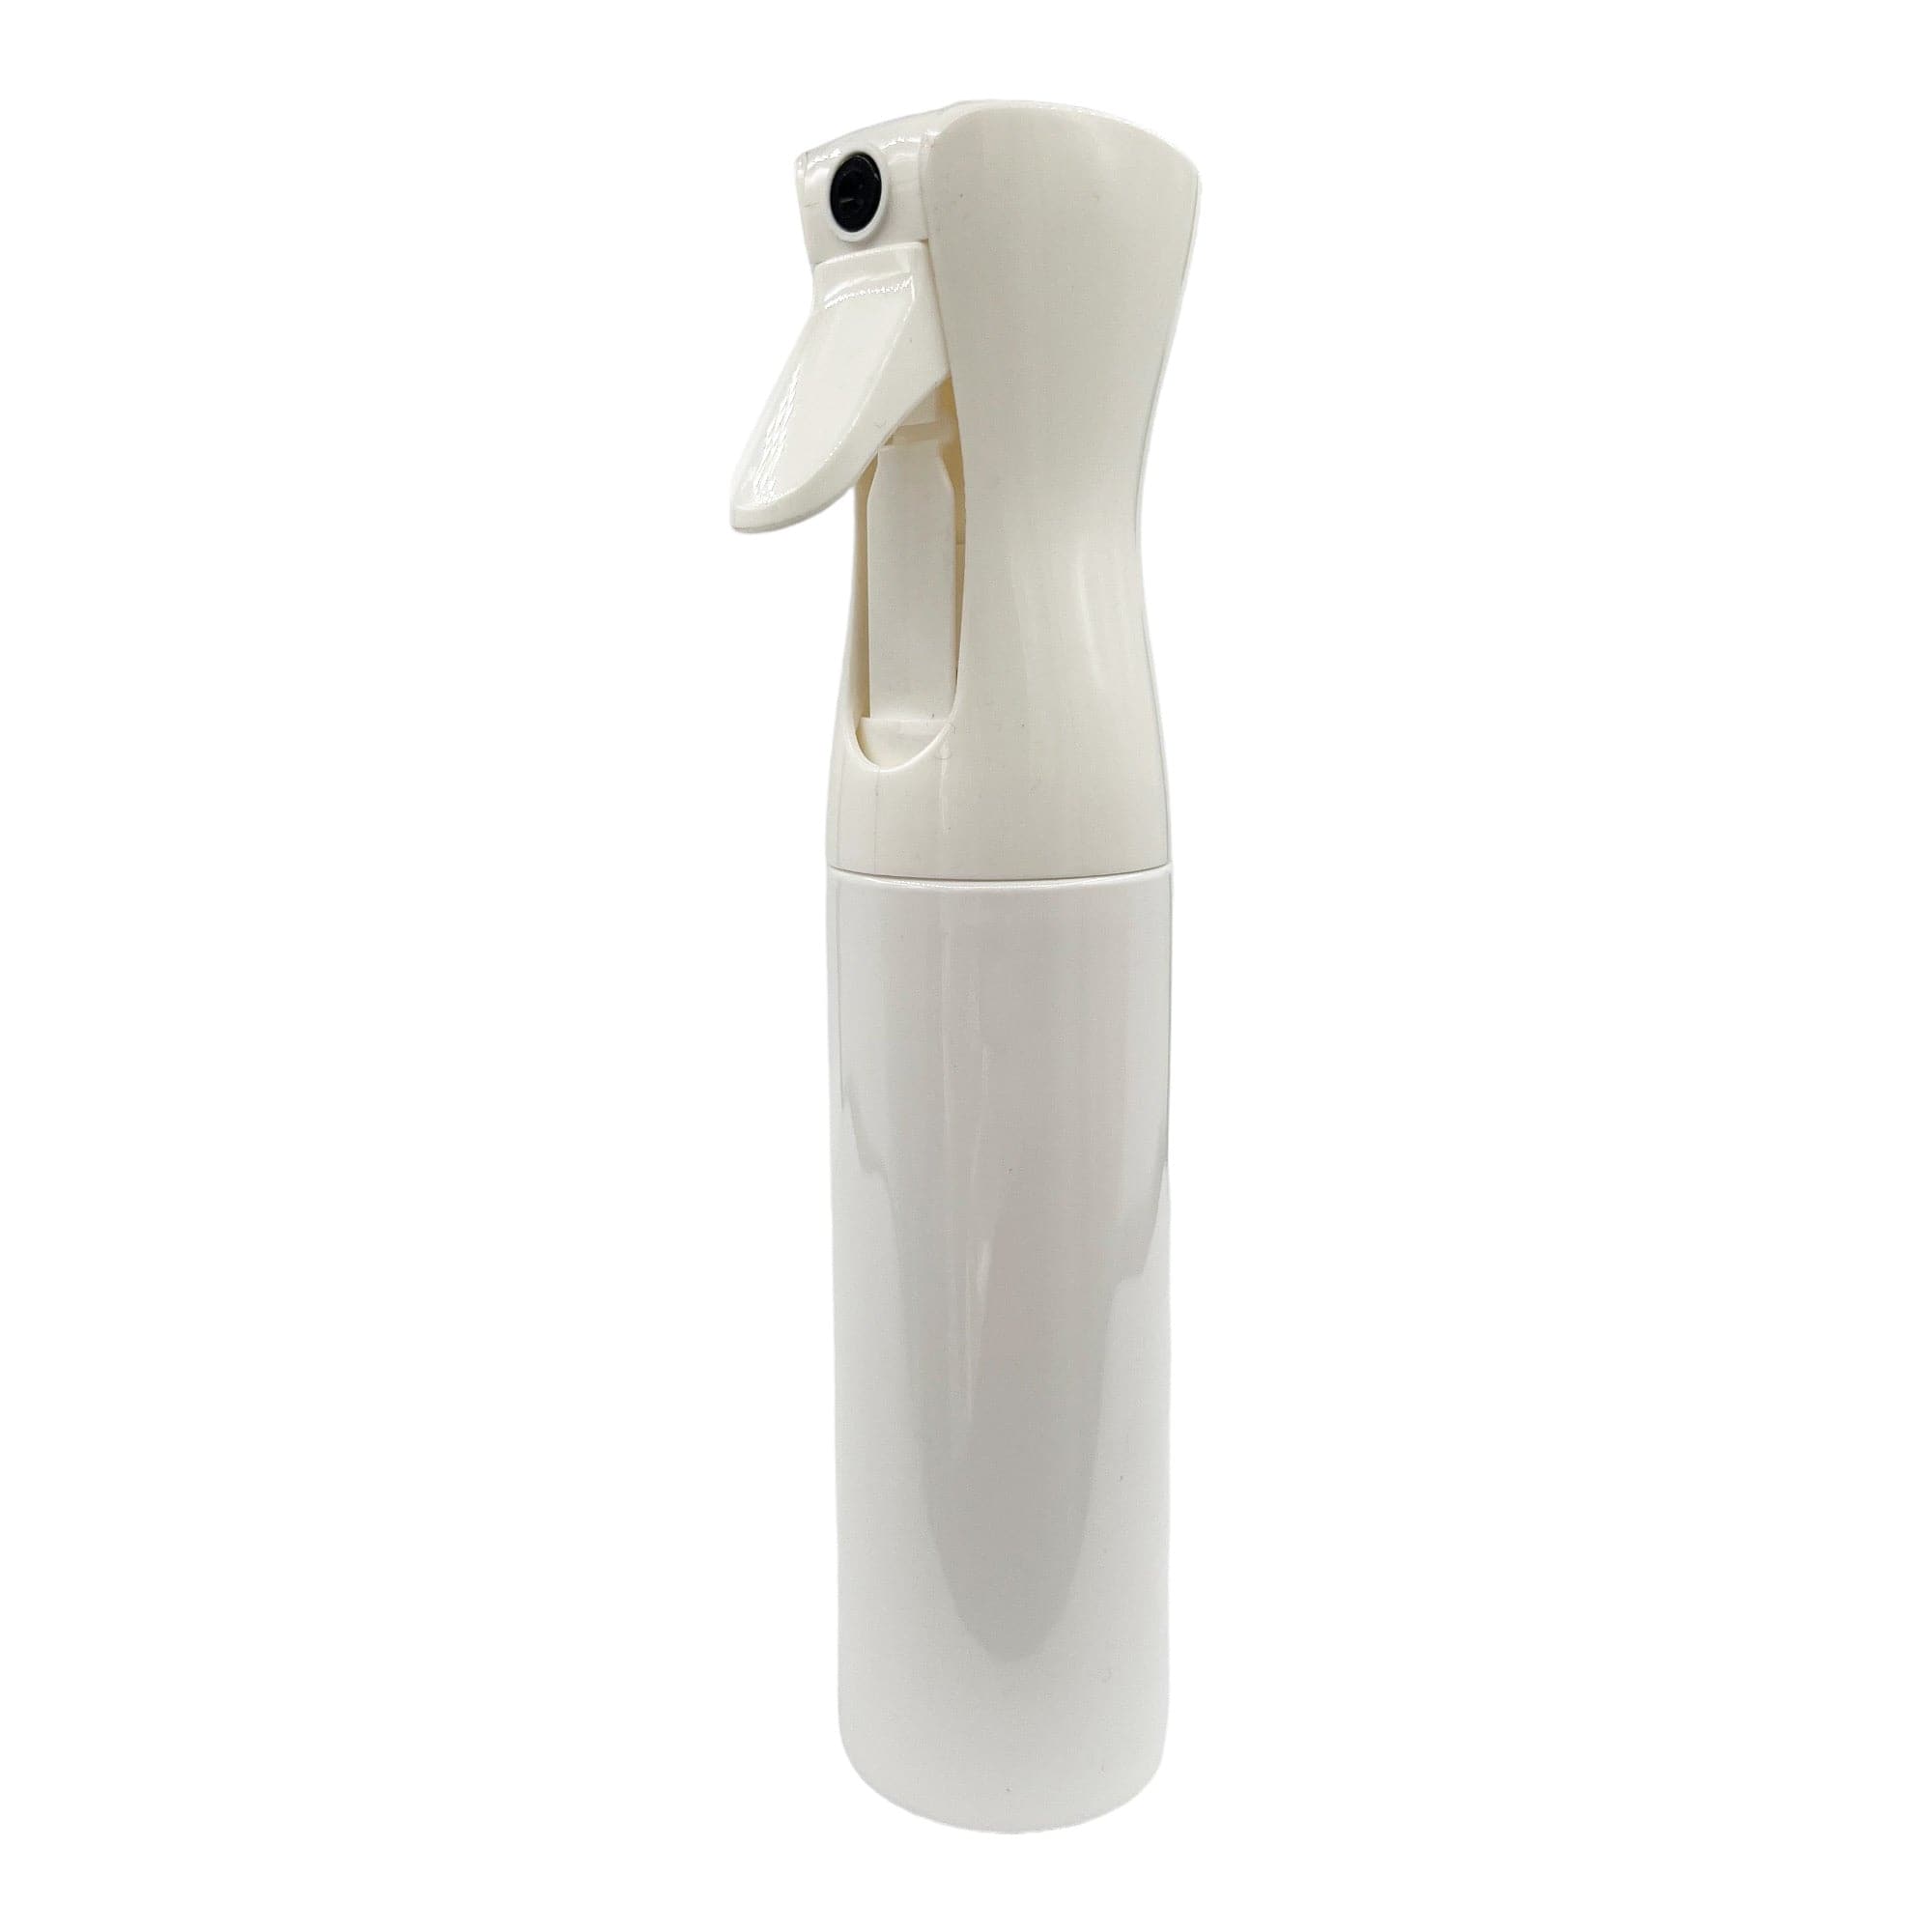 Eson - Water Spray Bottle 300ml Empty Refillable Continuous Water (White)